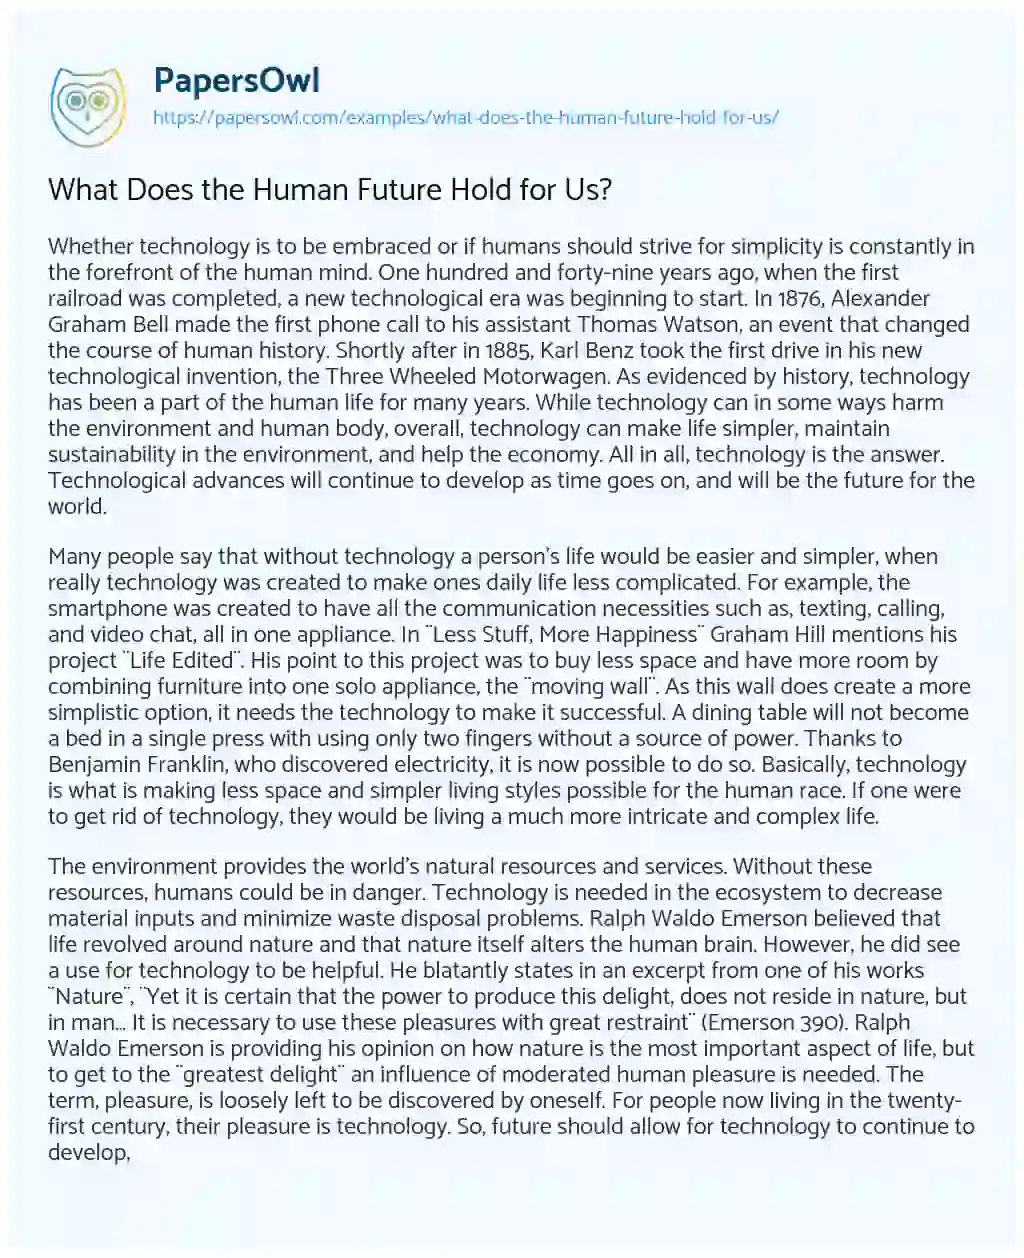 Essay on What does the Human Future Hold for Us?